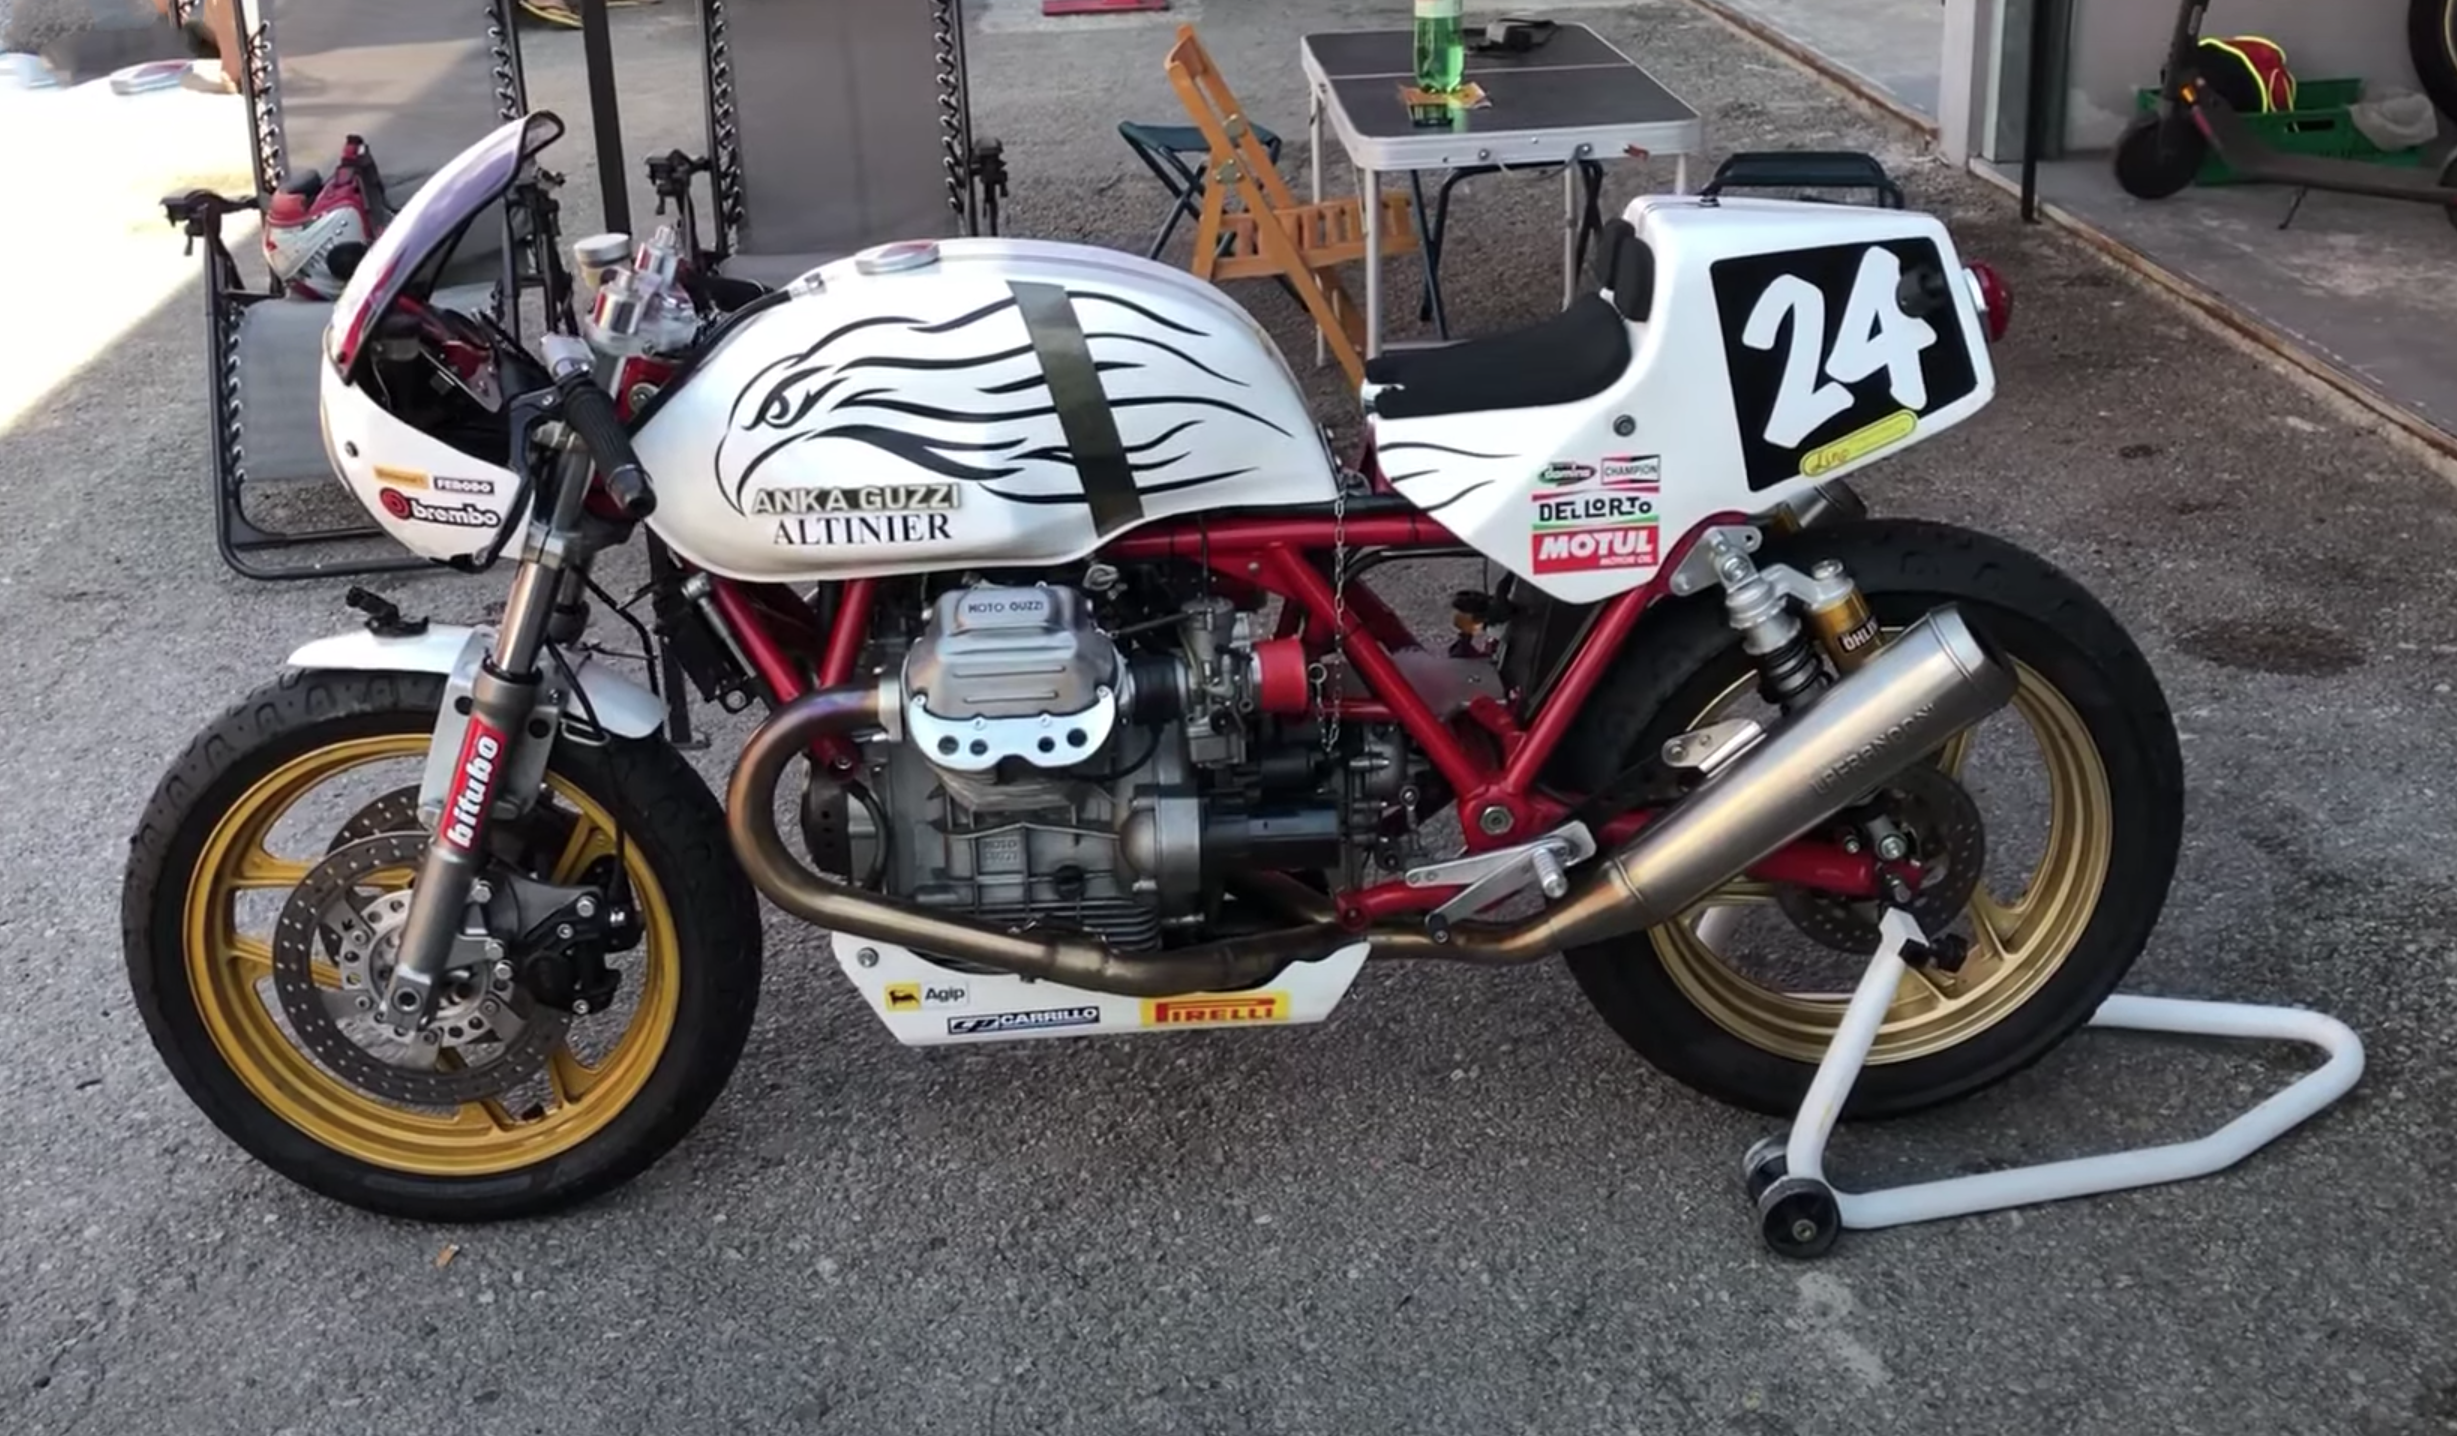 Load video: Moto Guzzi Racing Special ... 1185cc and 105 HP